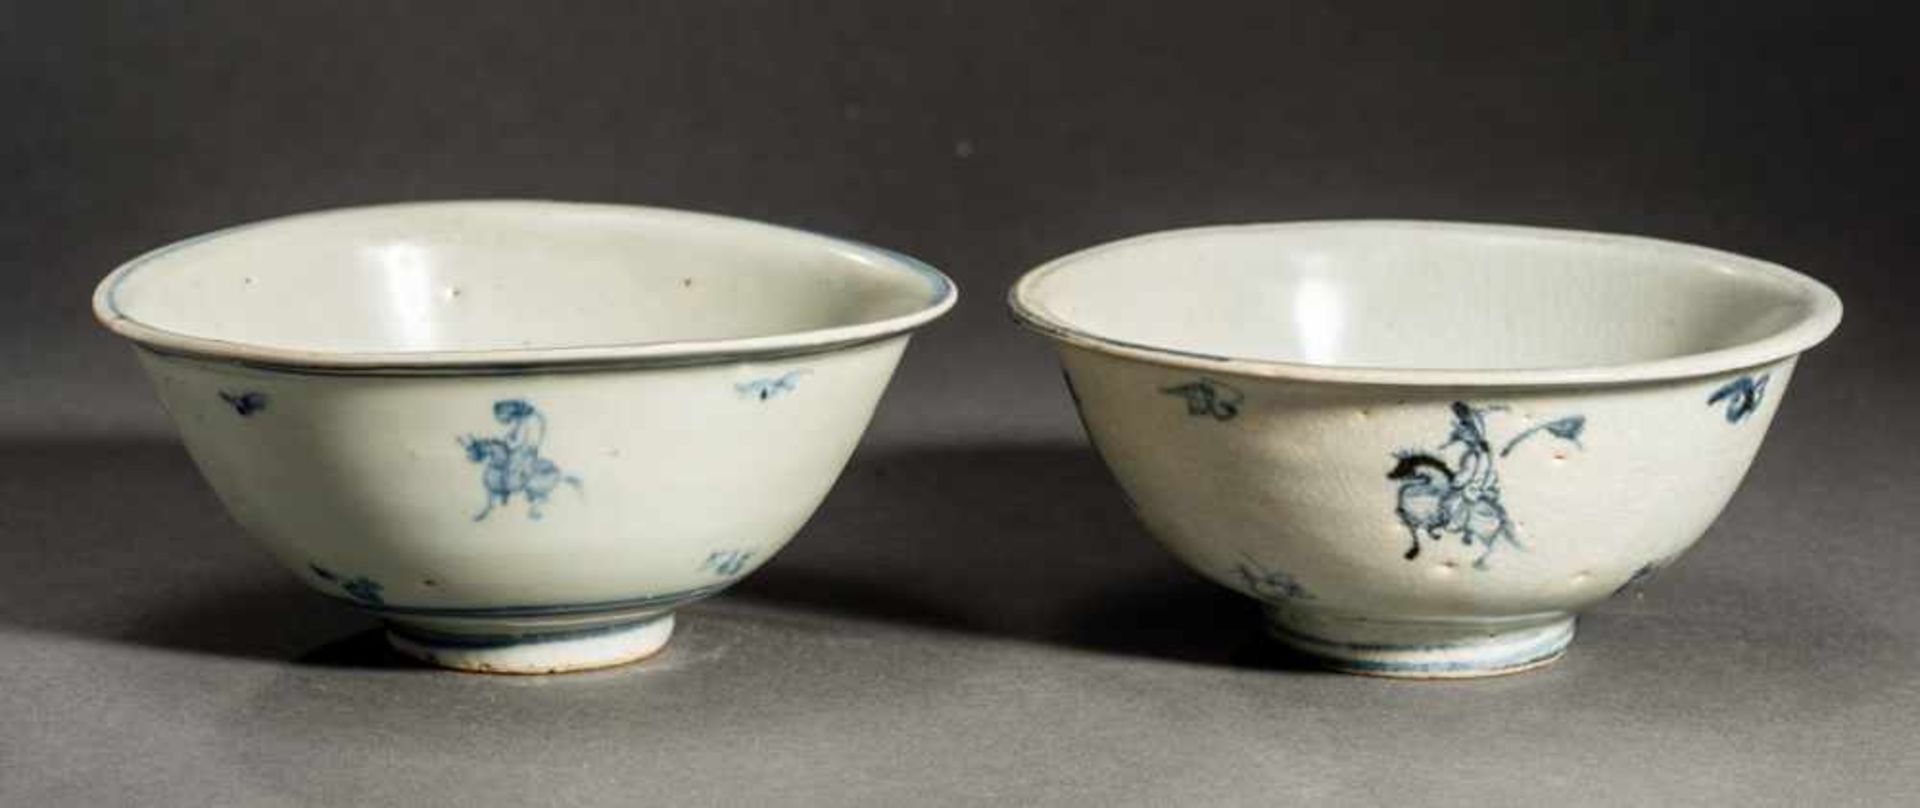 TWO BOWLS WITH HORSEBACK RIDERS Glazed stoneware. China, Ming dynasty(1368-1644)騎士紋碗Both pieces have